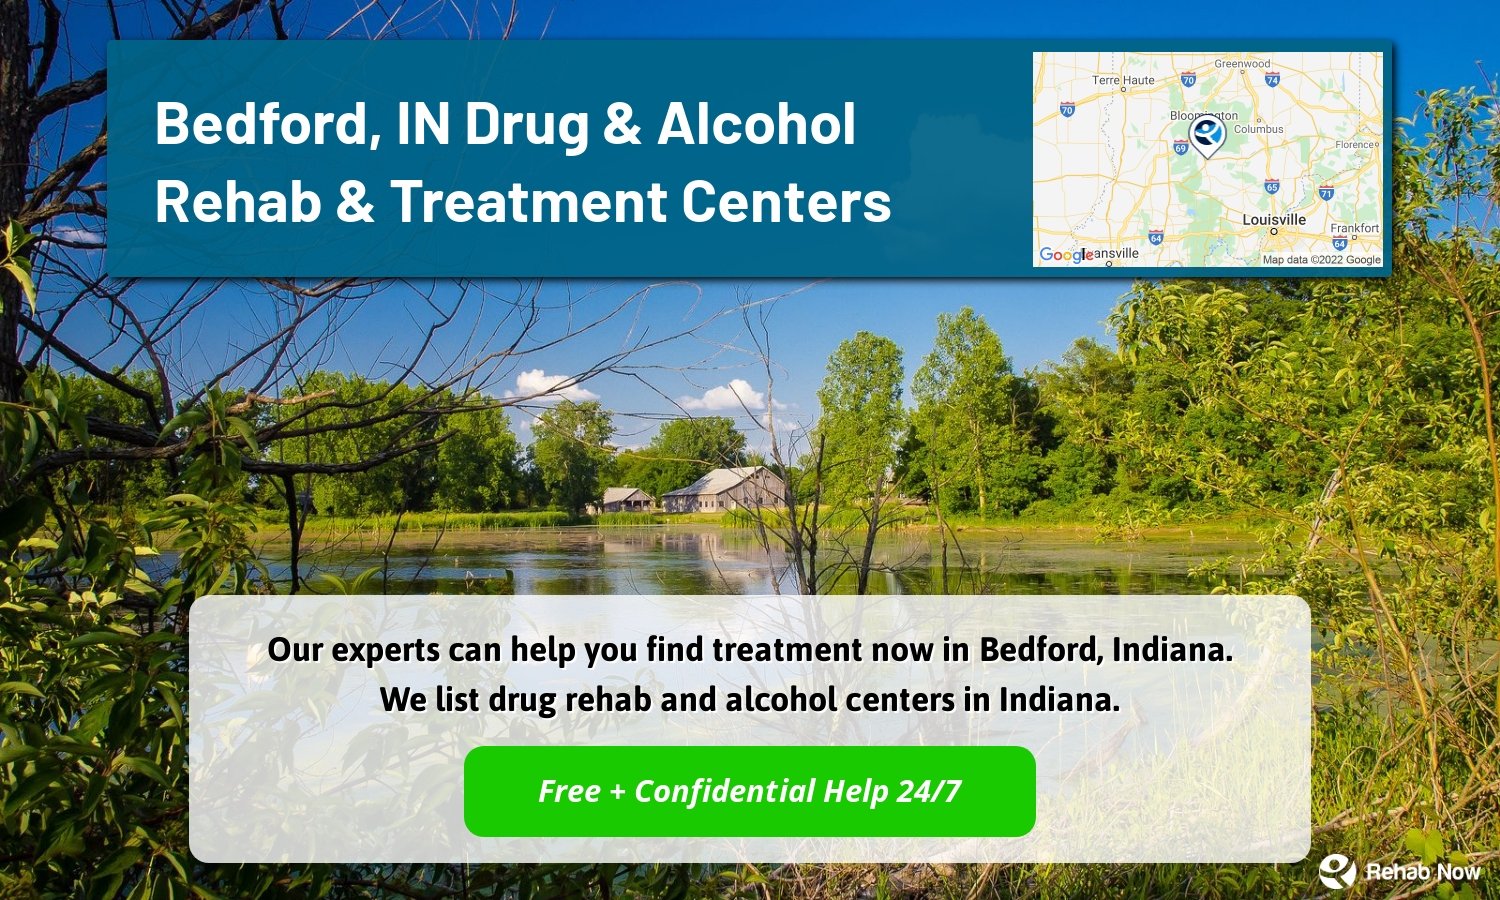 Our experts can help you find treatment now in Bedford, Indiana. We list drug rehab and alcohol centers in Indiana.